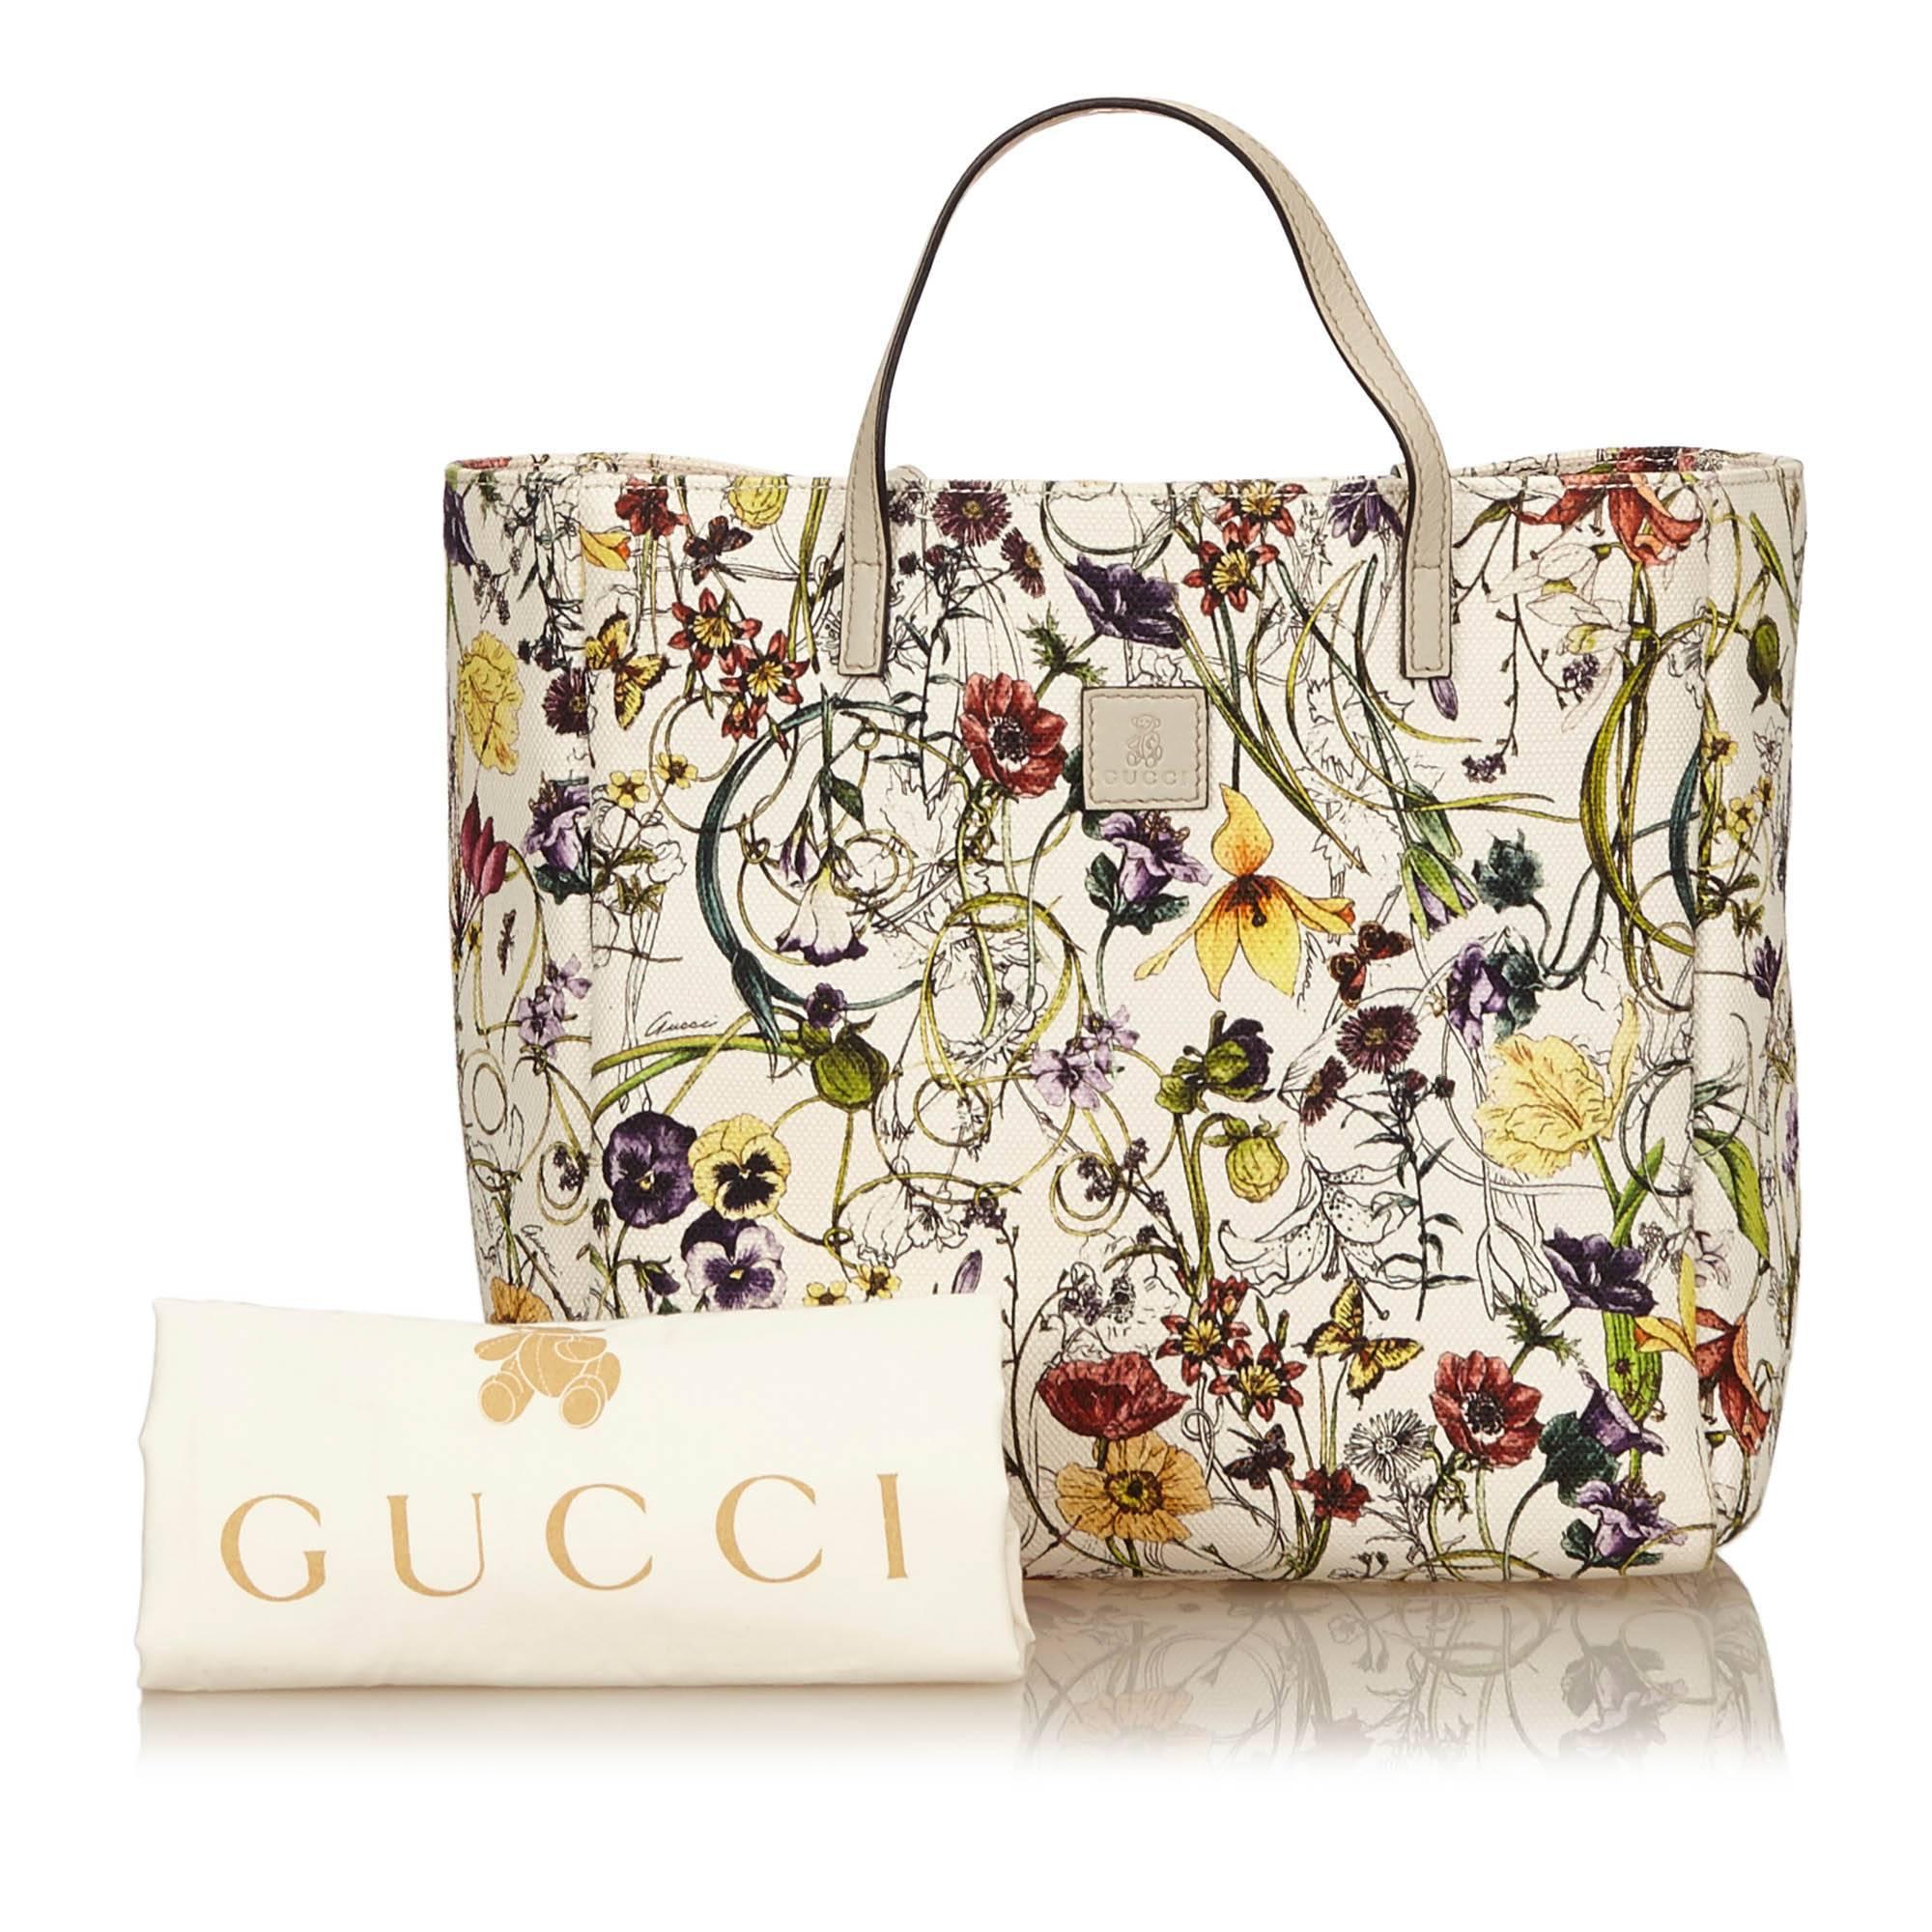 Gucci White with Multi Coloured Floral Printed Canvas Tote Bag 1